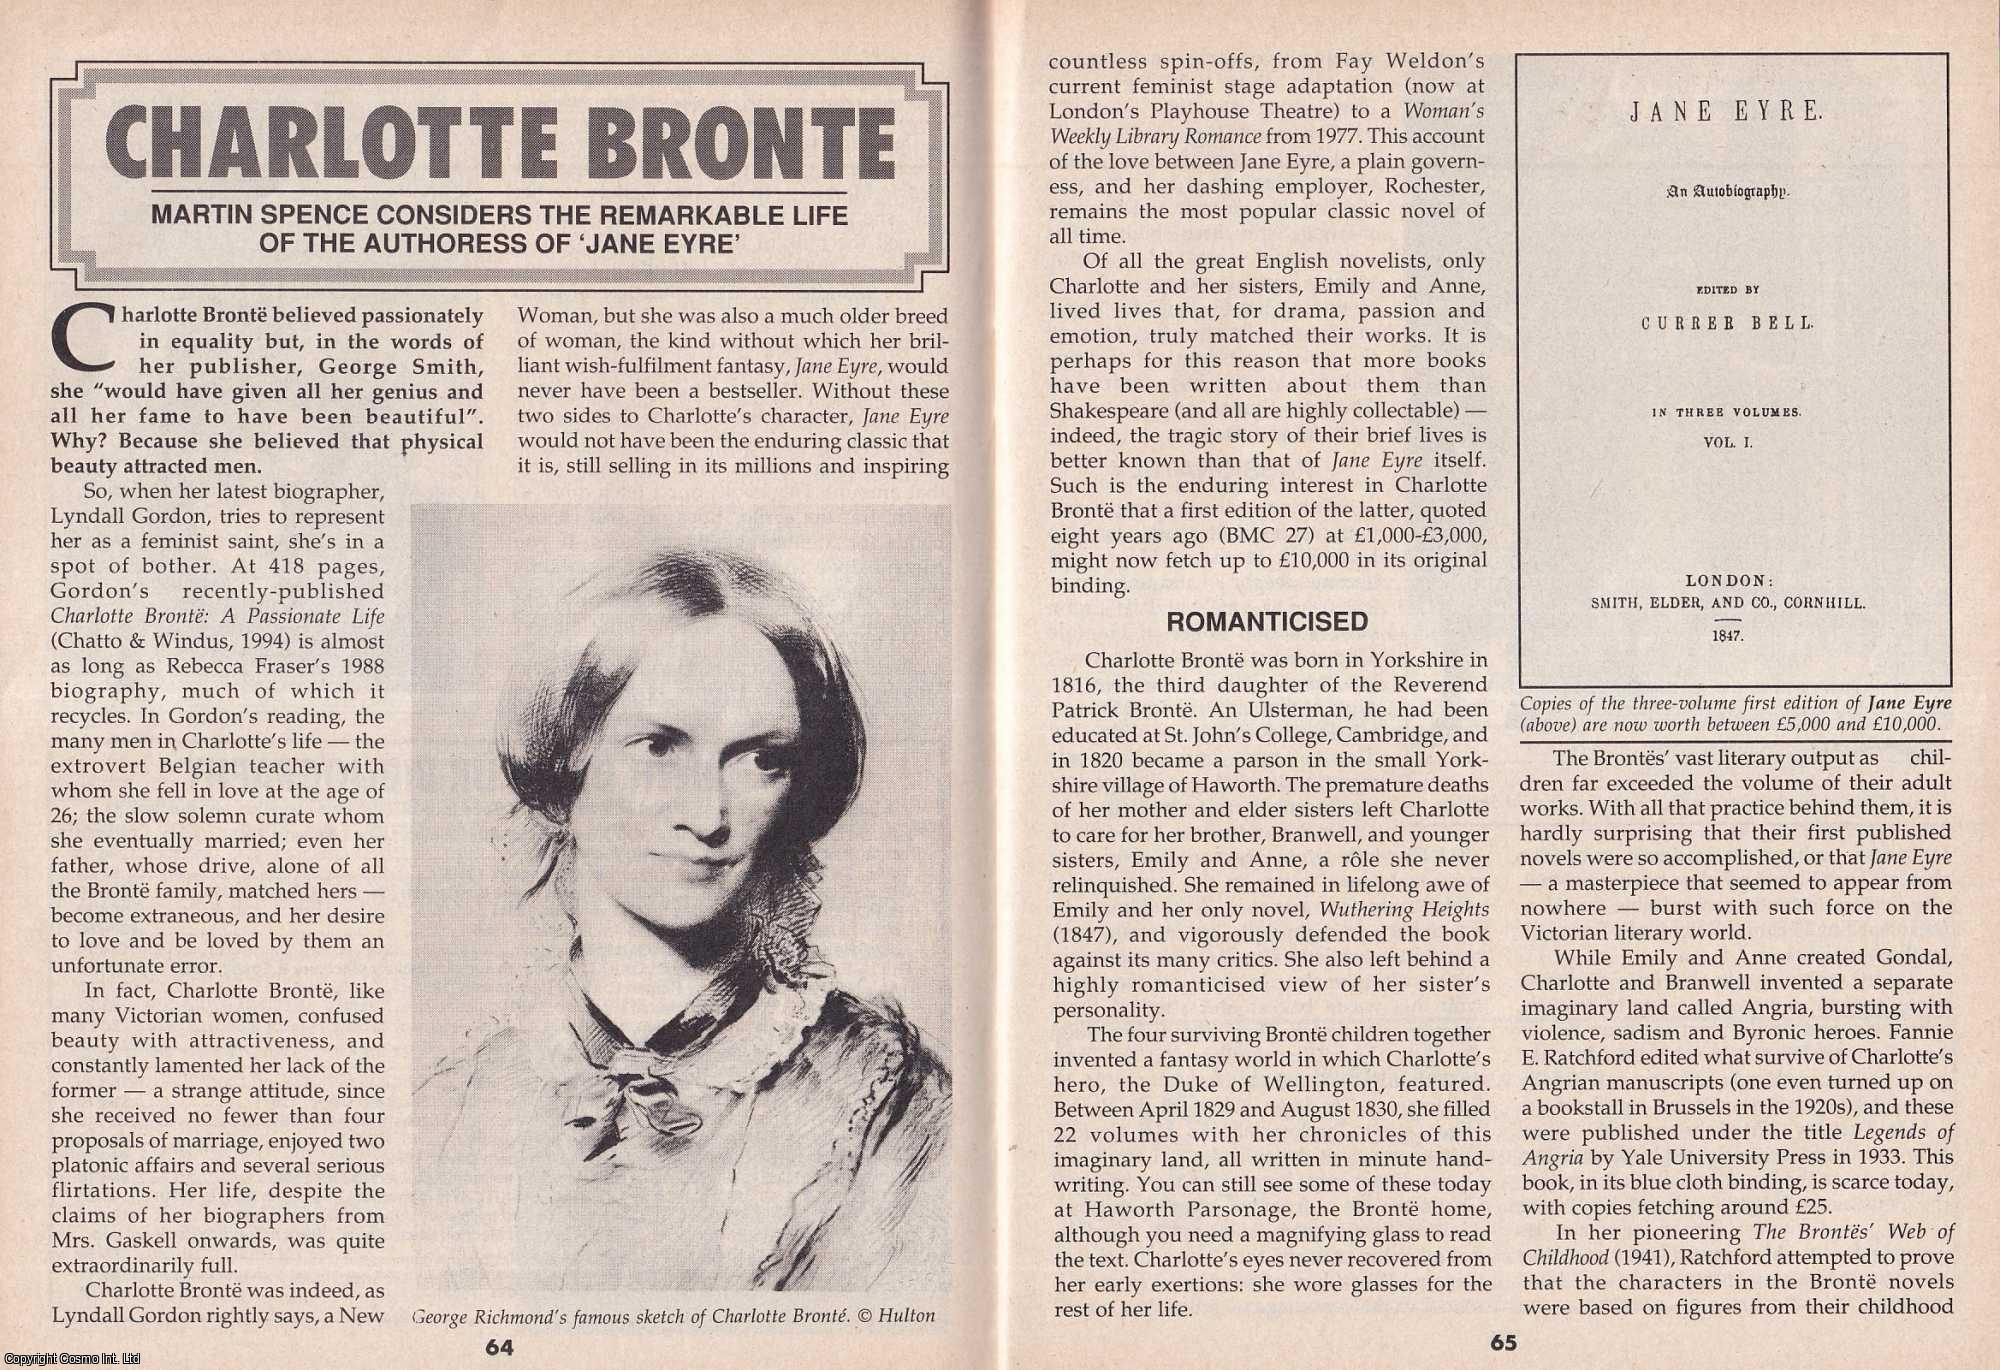 Martin Spence - Charlotte Bronte. Considering The Remarkable Life of The Authoress of Jane Eyre. This is an original article separated from an issue of The Book & Magazine Collector publication.